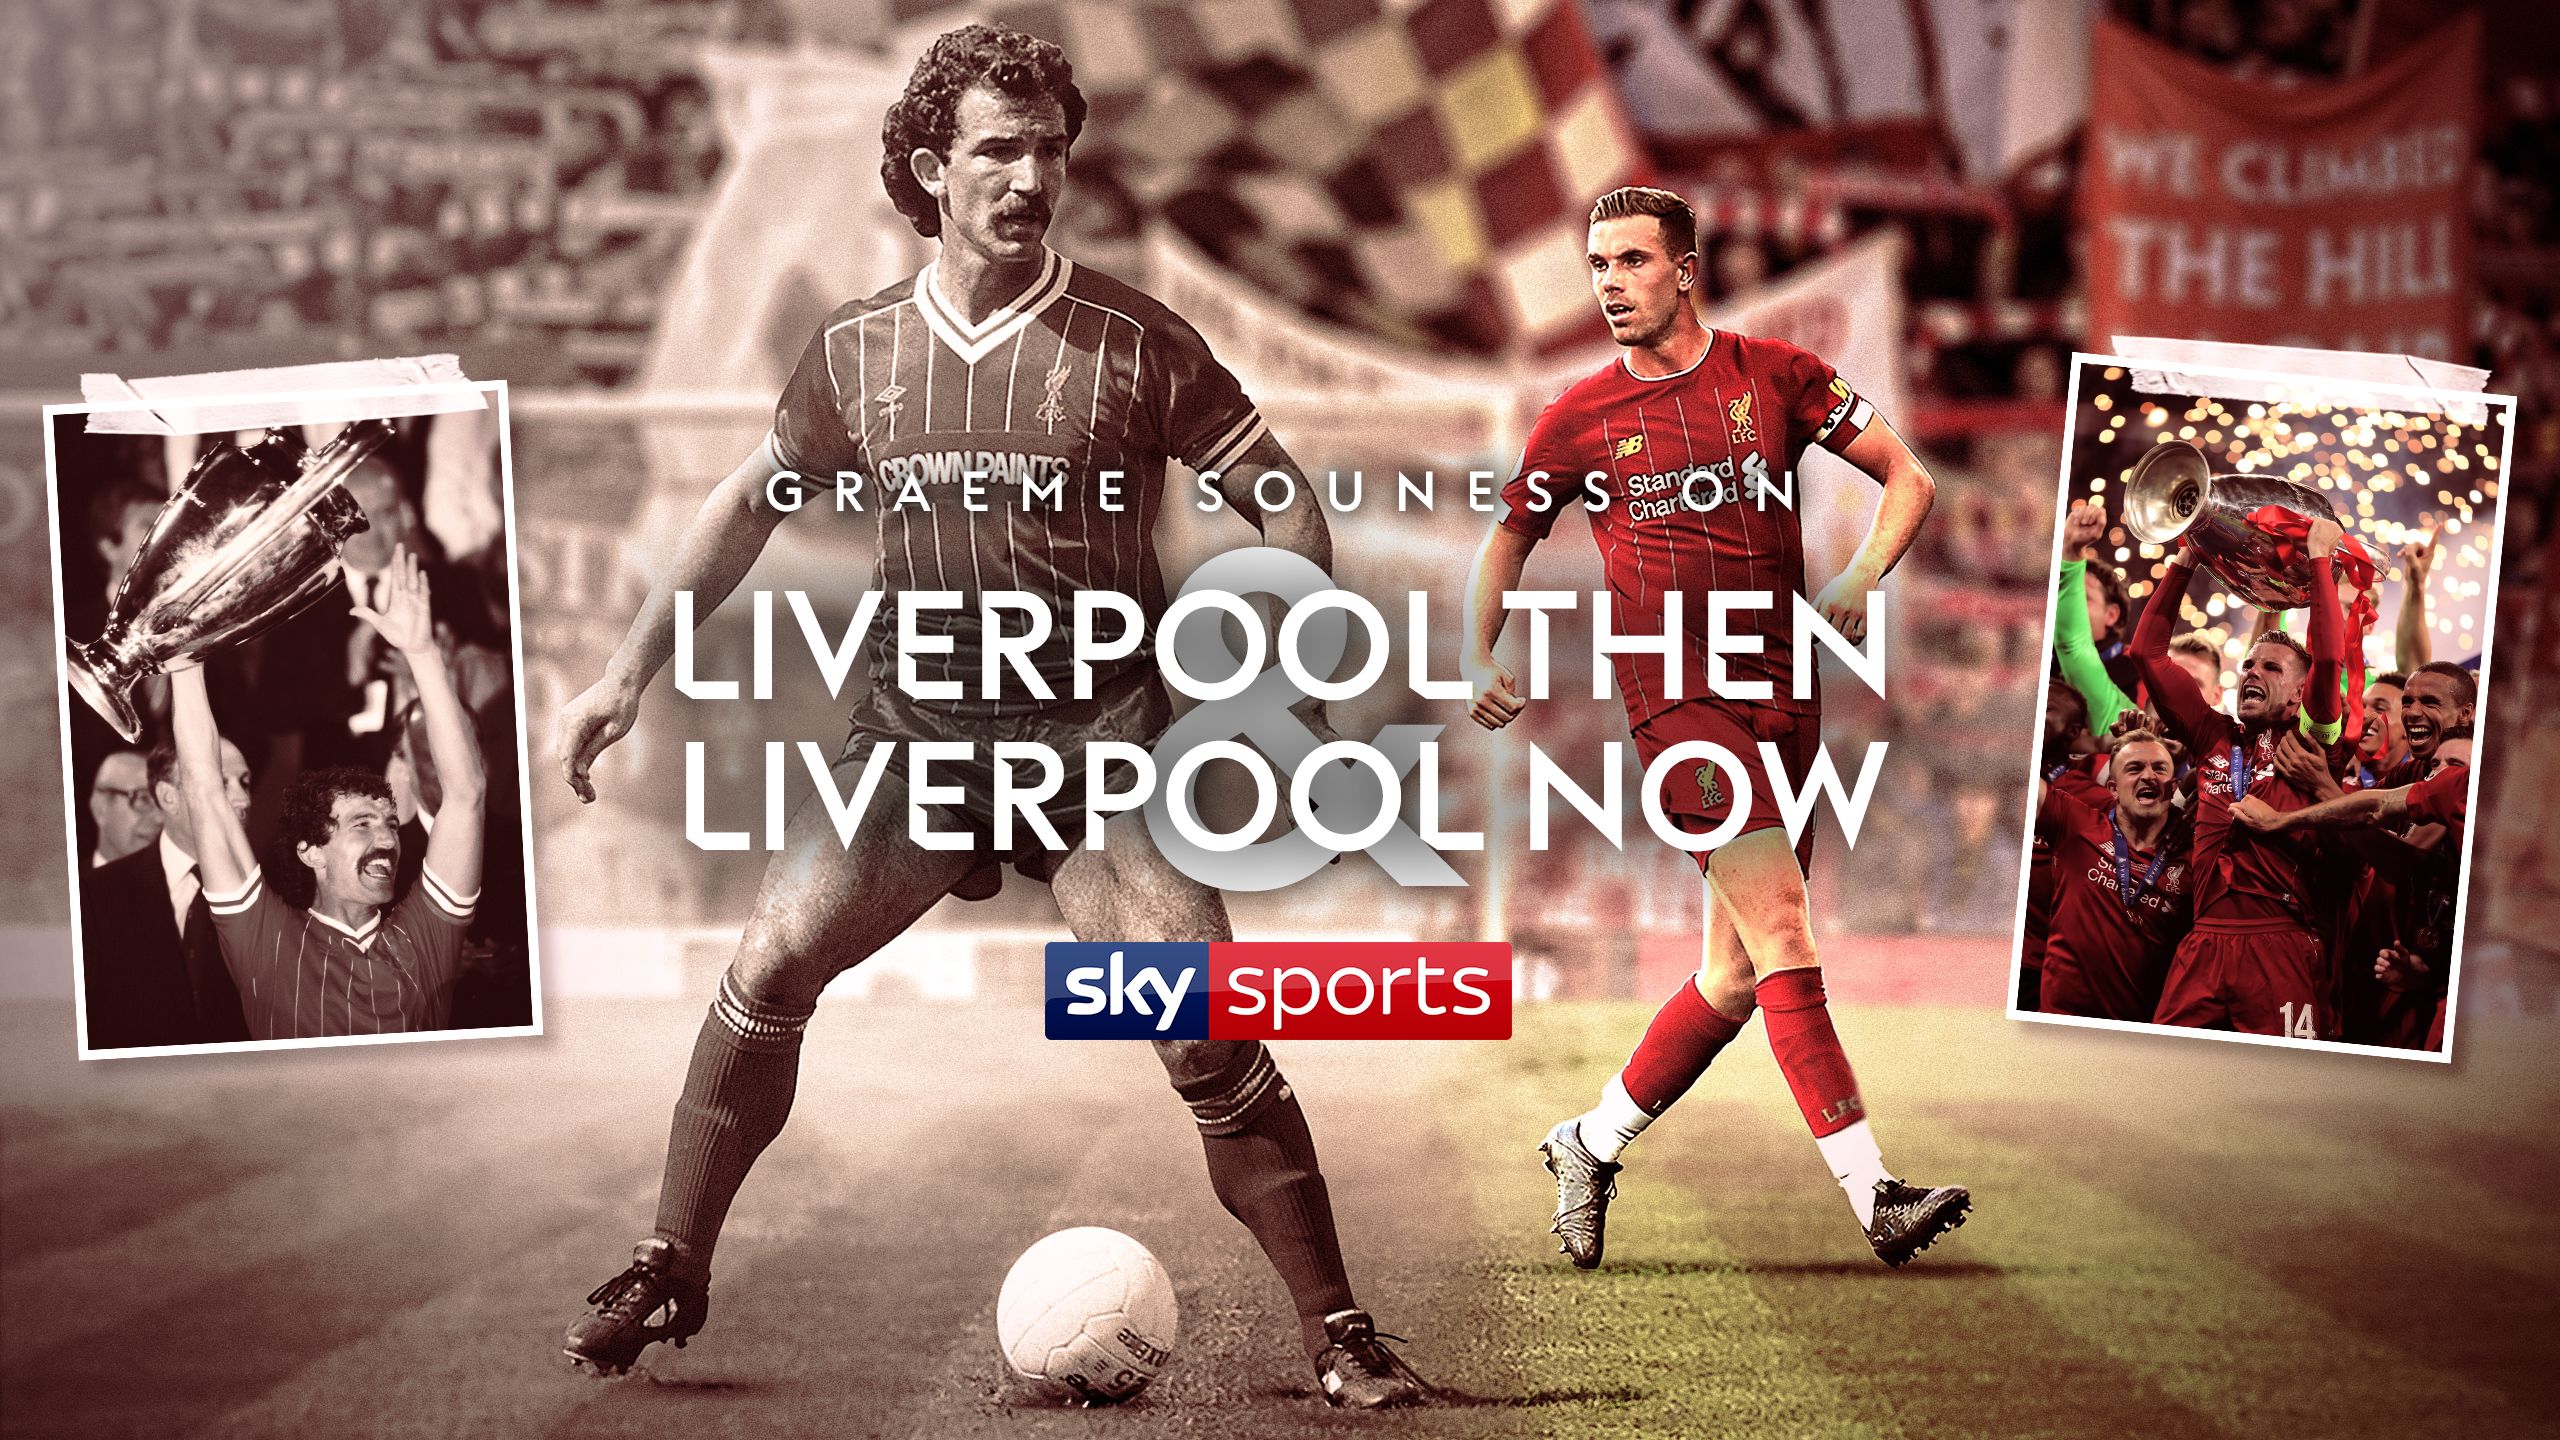 Souness Liverpool Then And Liverpool Now Football News Sky Sports